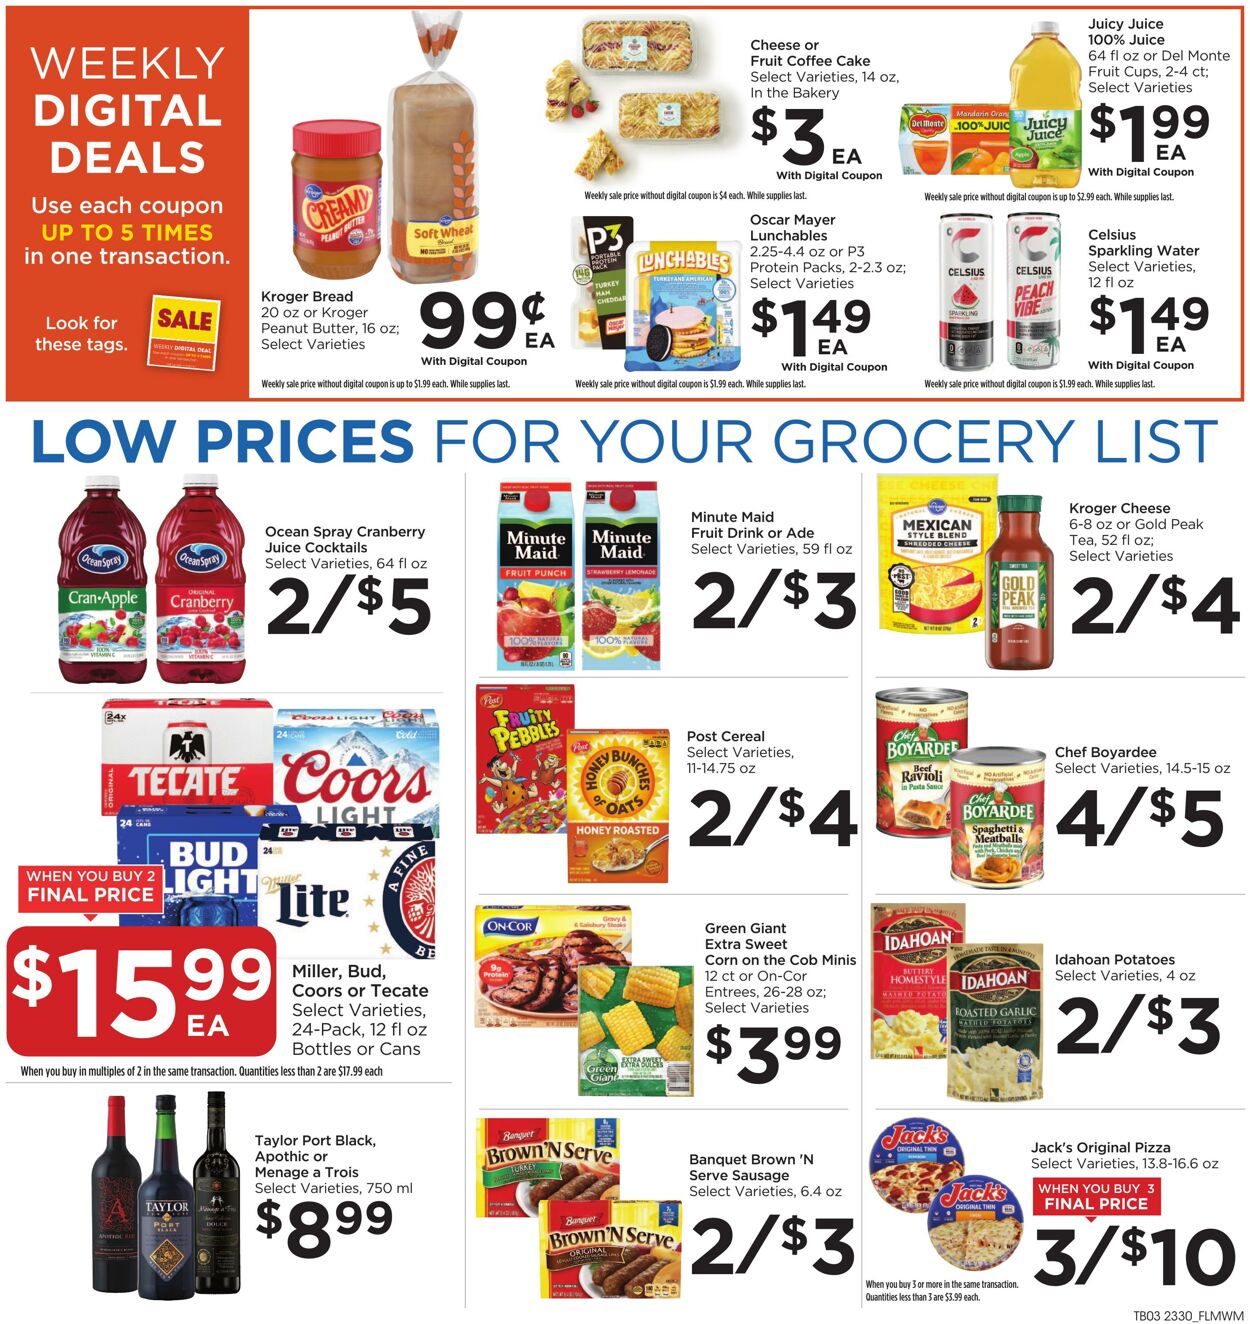 Food 4 Less Ad from 08/23/2023